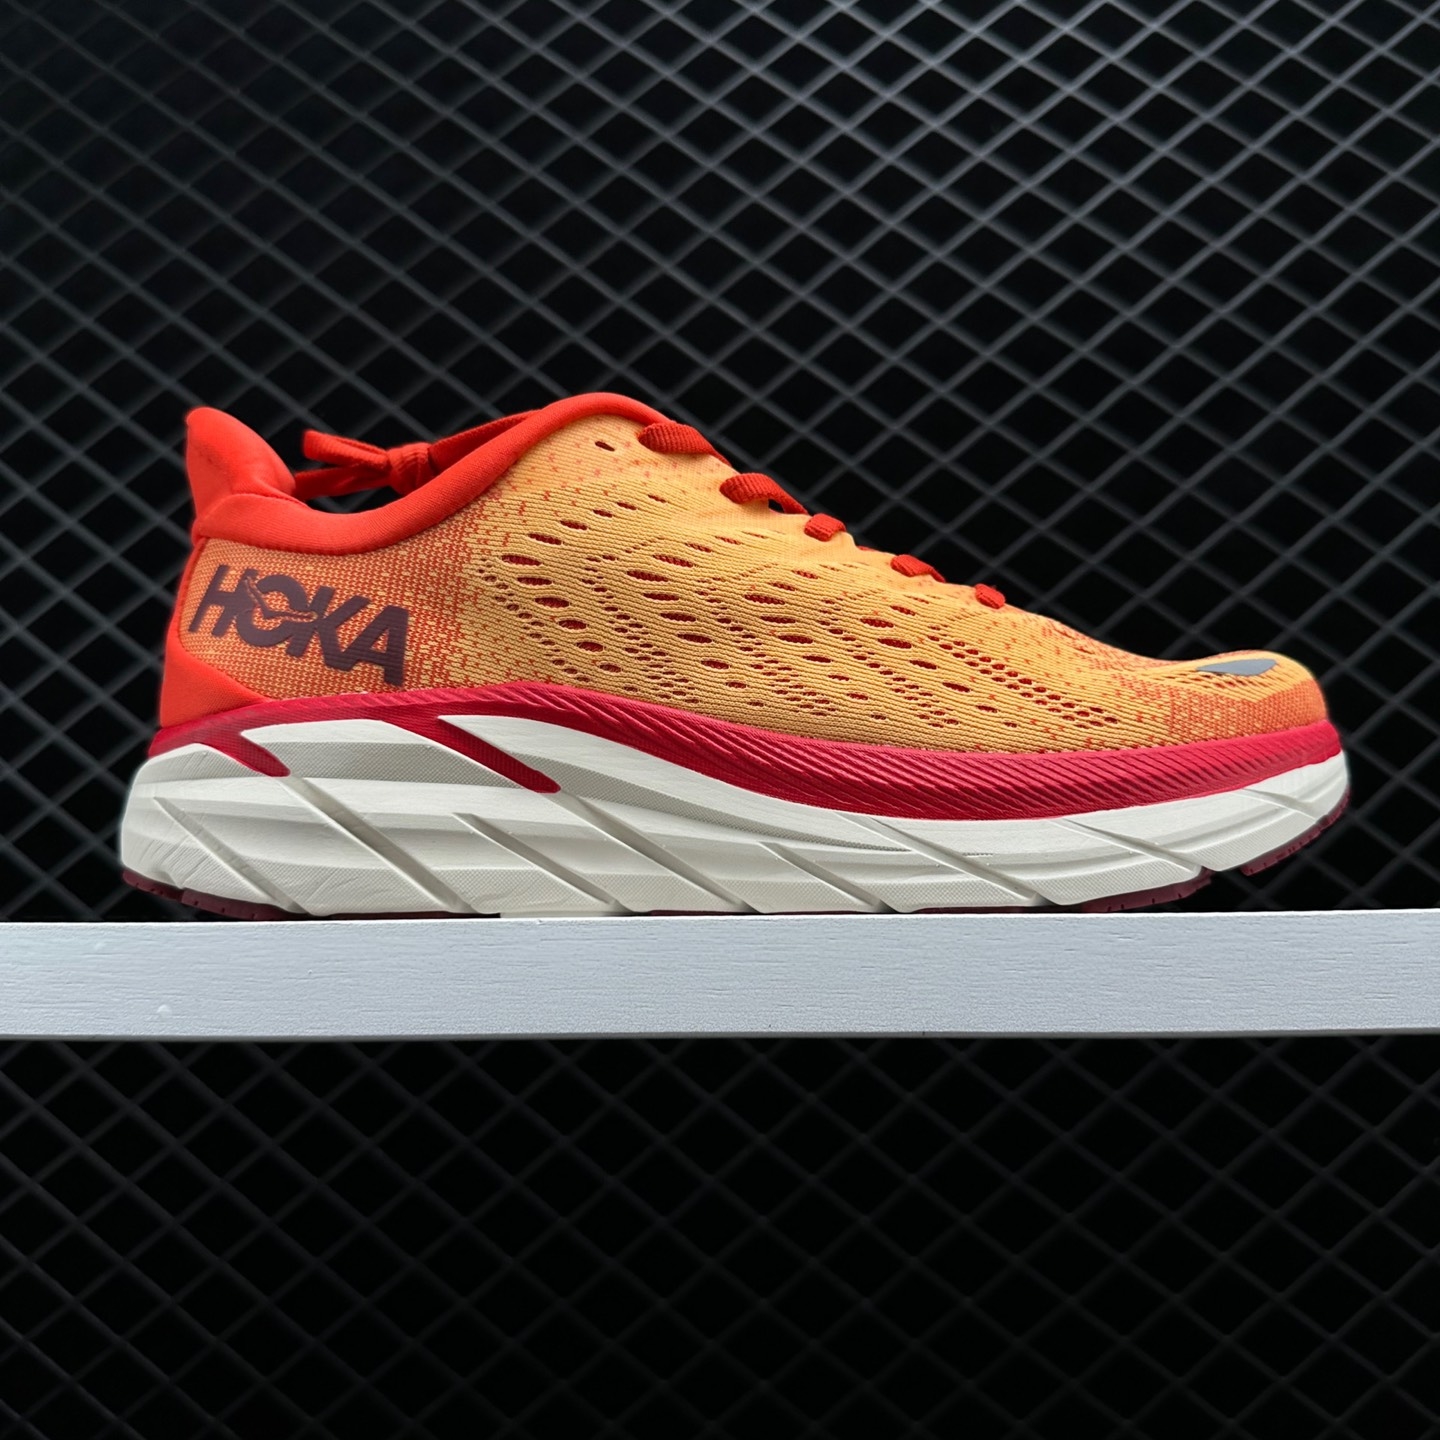 Hoka One One Clifton 8 Red Orange Running Shoes: Lightweight & Cushioned!